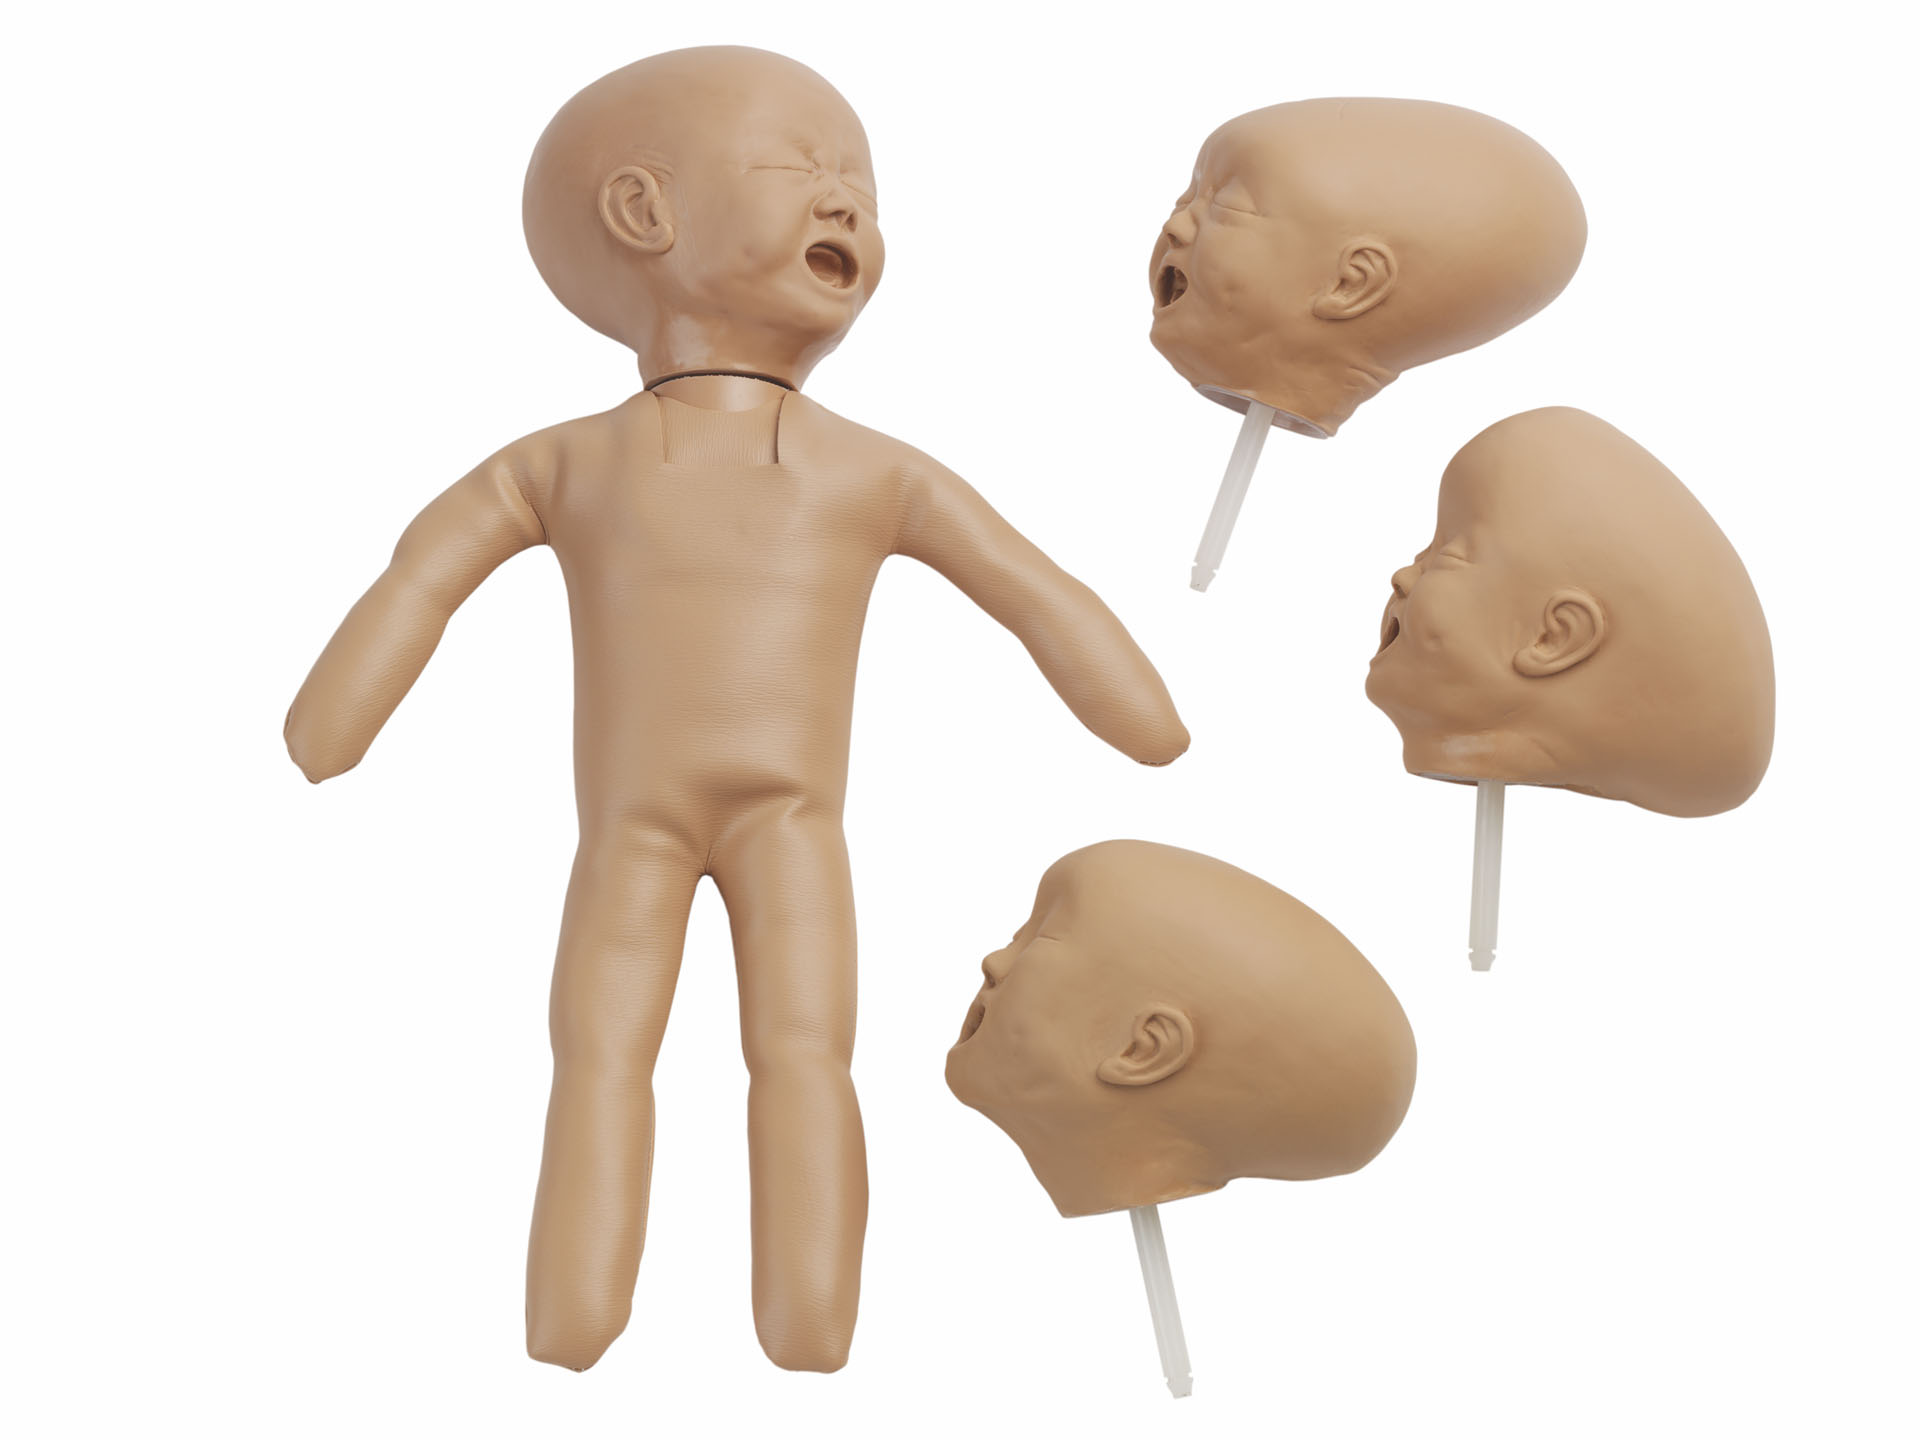 Fetal Doll With Four Heads, Light